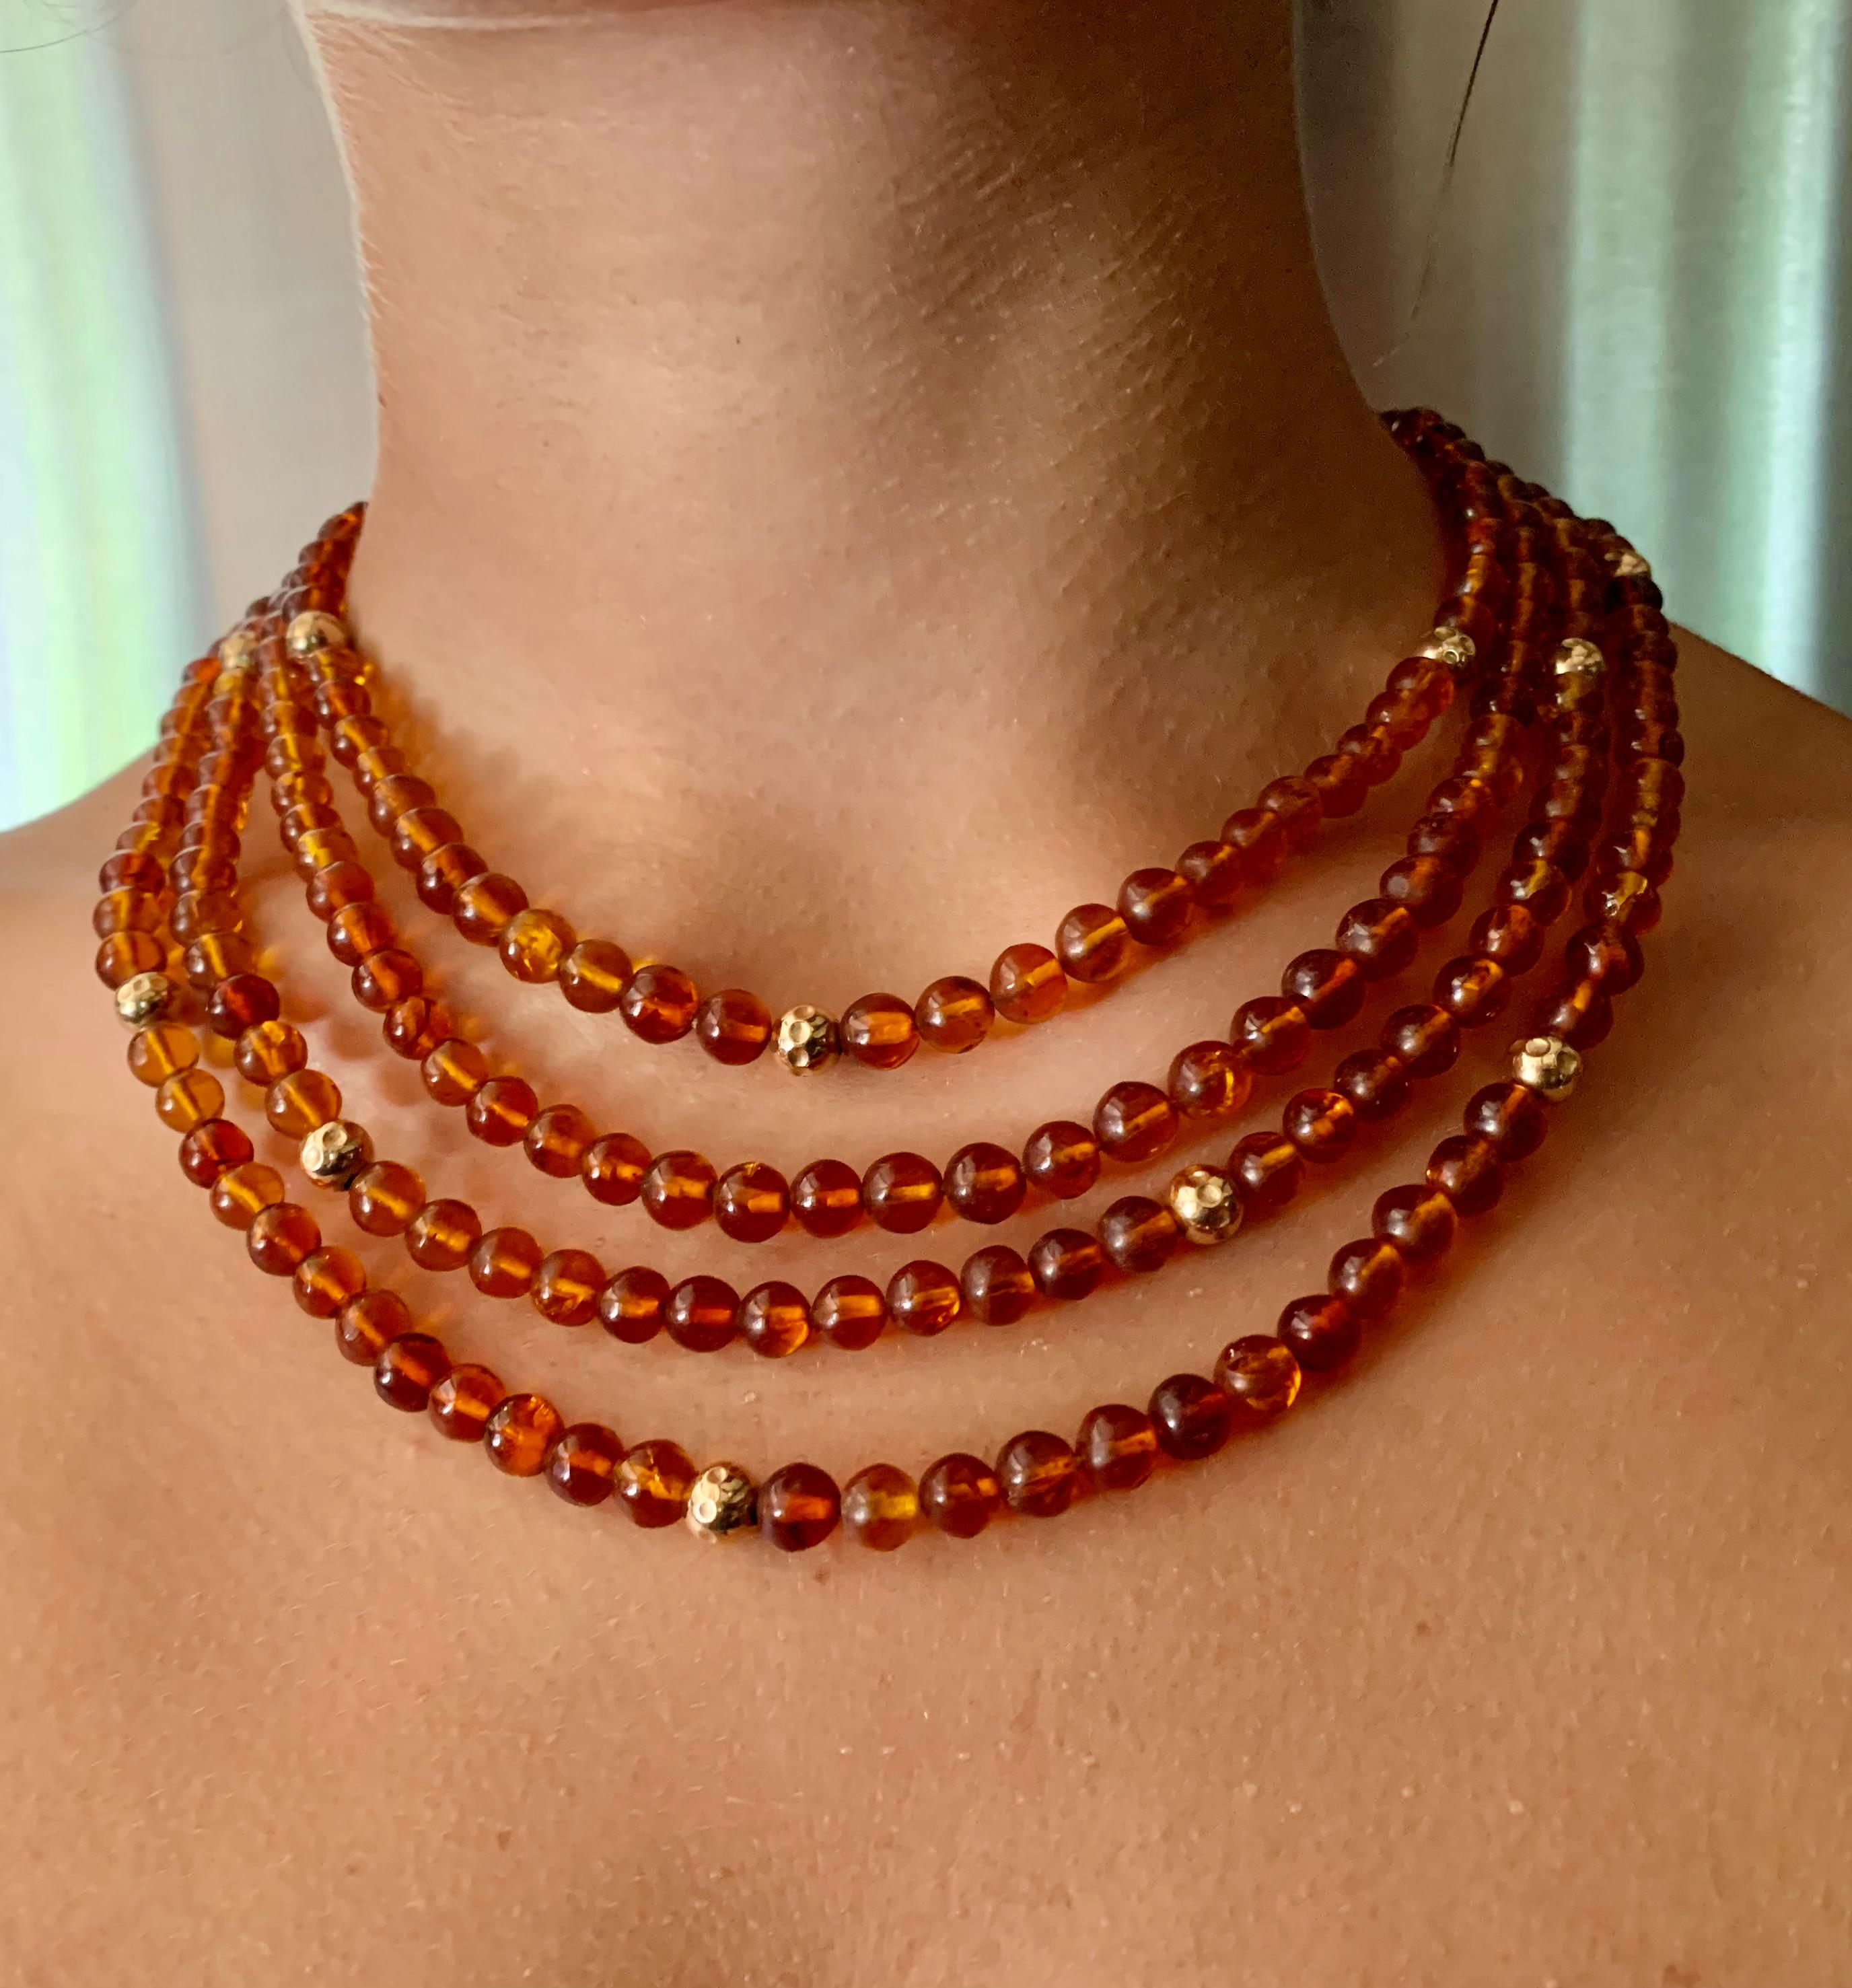 Early 20th Century round natural honey colored 5-6mm amber and hammered 5mm gold bead necklace composed of four strands. 
The amber beads lively, ranging in color from a golden yellow to light orange honey color with natural inclusions, slightly